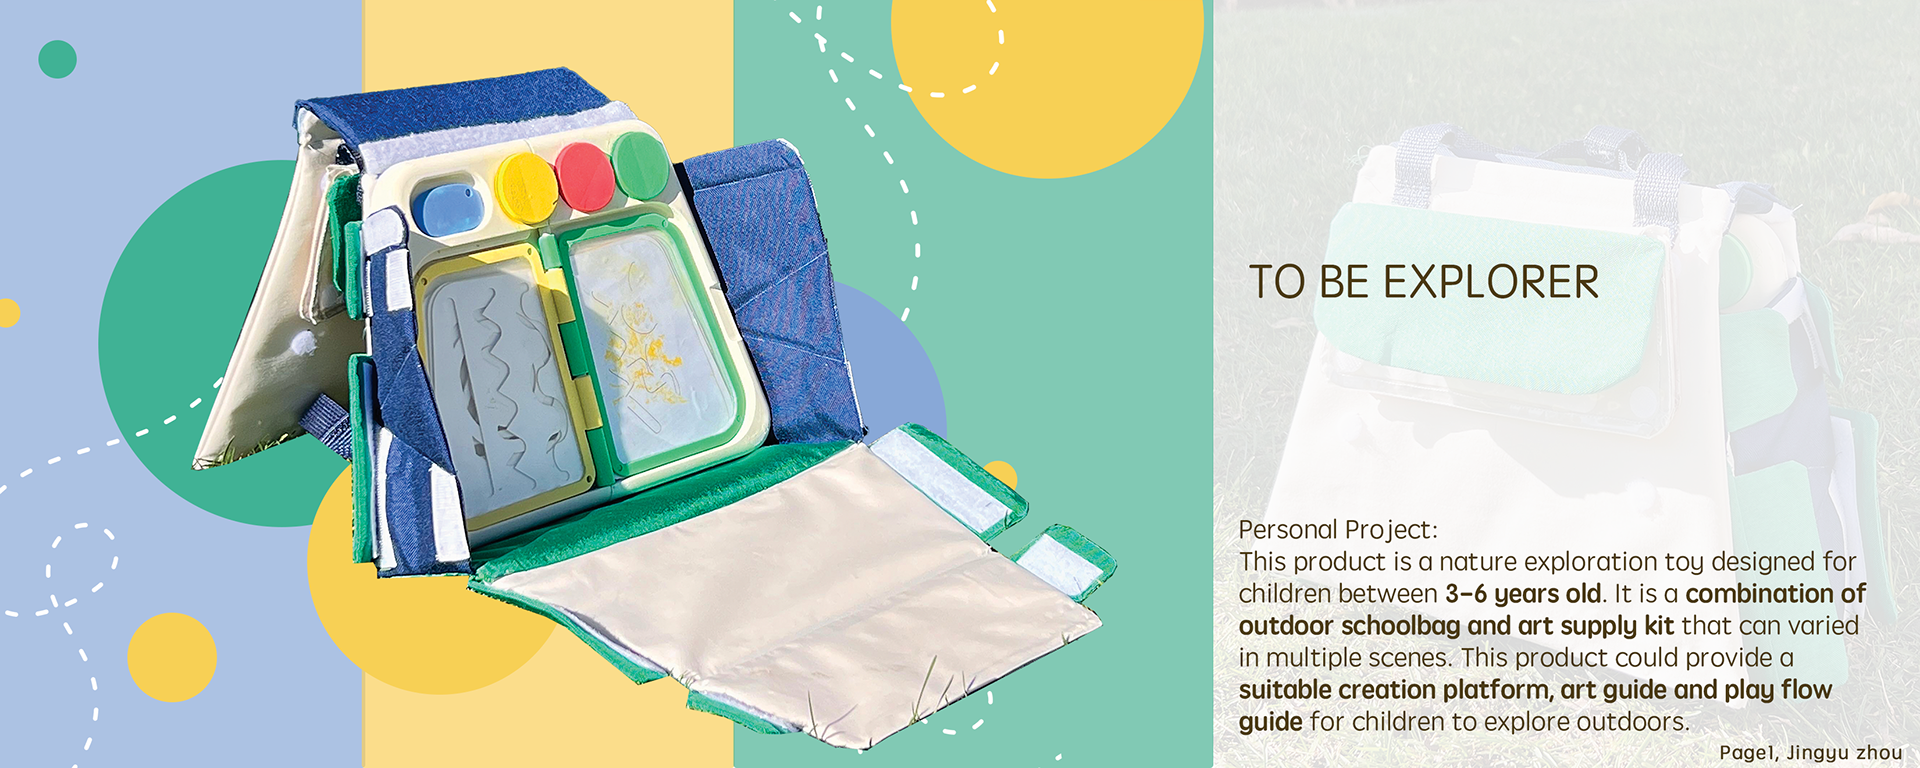 This product is a nature exploration toy designed for children between 3-6 years old. It is a combination of outdoor schoolbag and art supply kit that can varied in multiple scenes. This product could provide a suitable creation platform, art guide and play flow guide for children to explore outdoors.